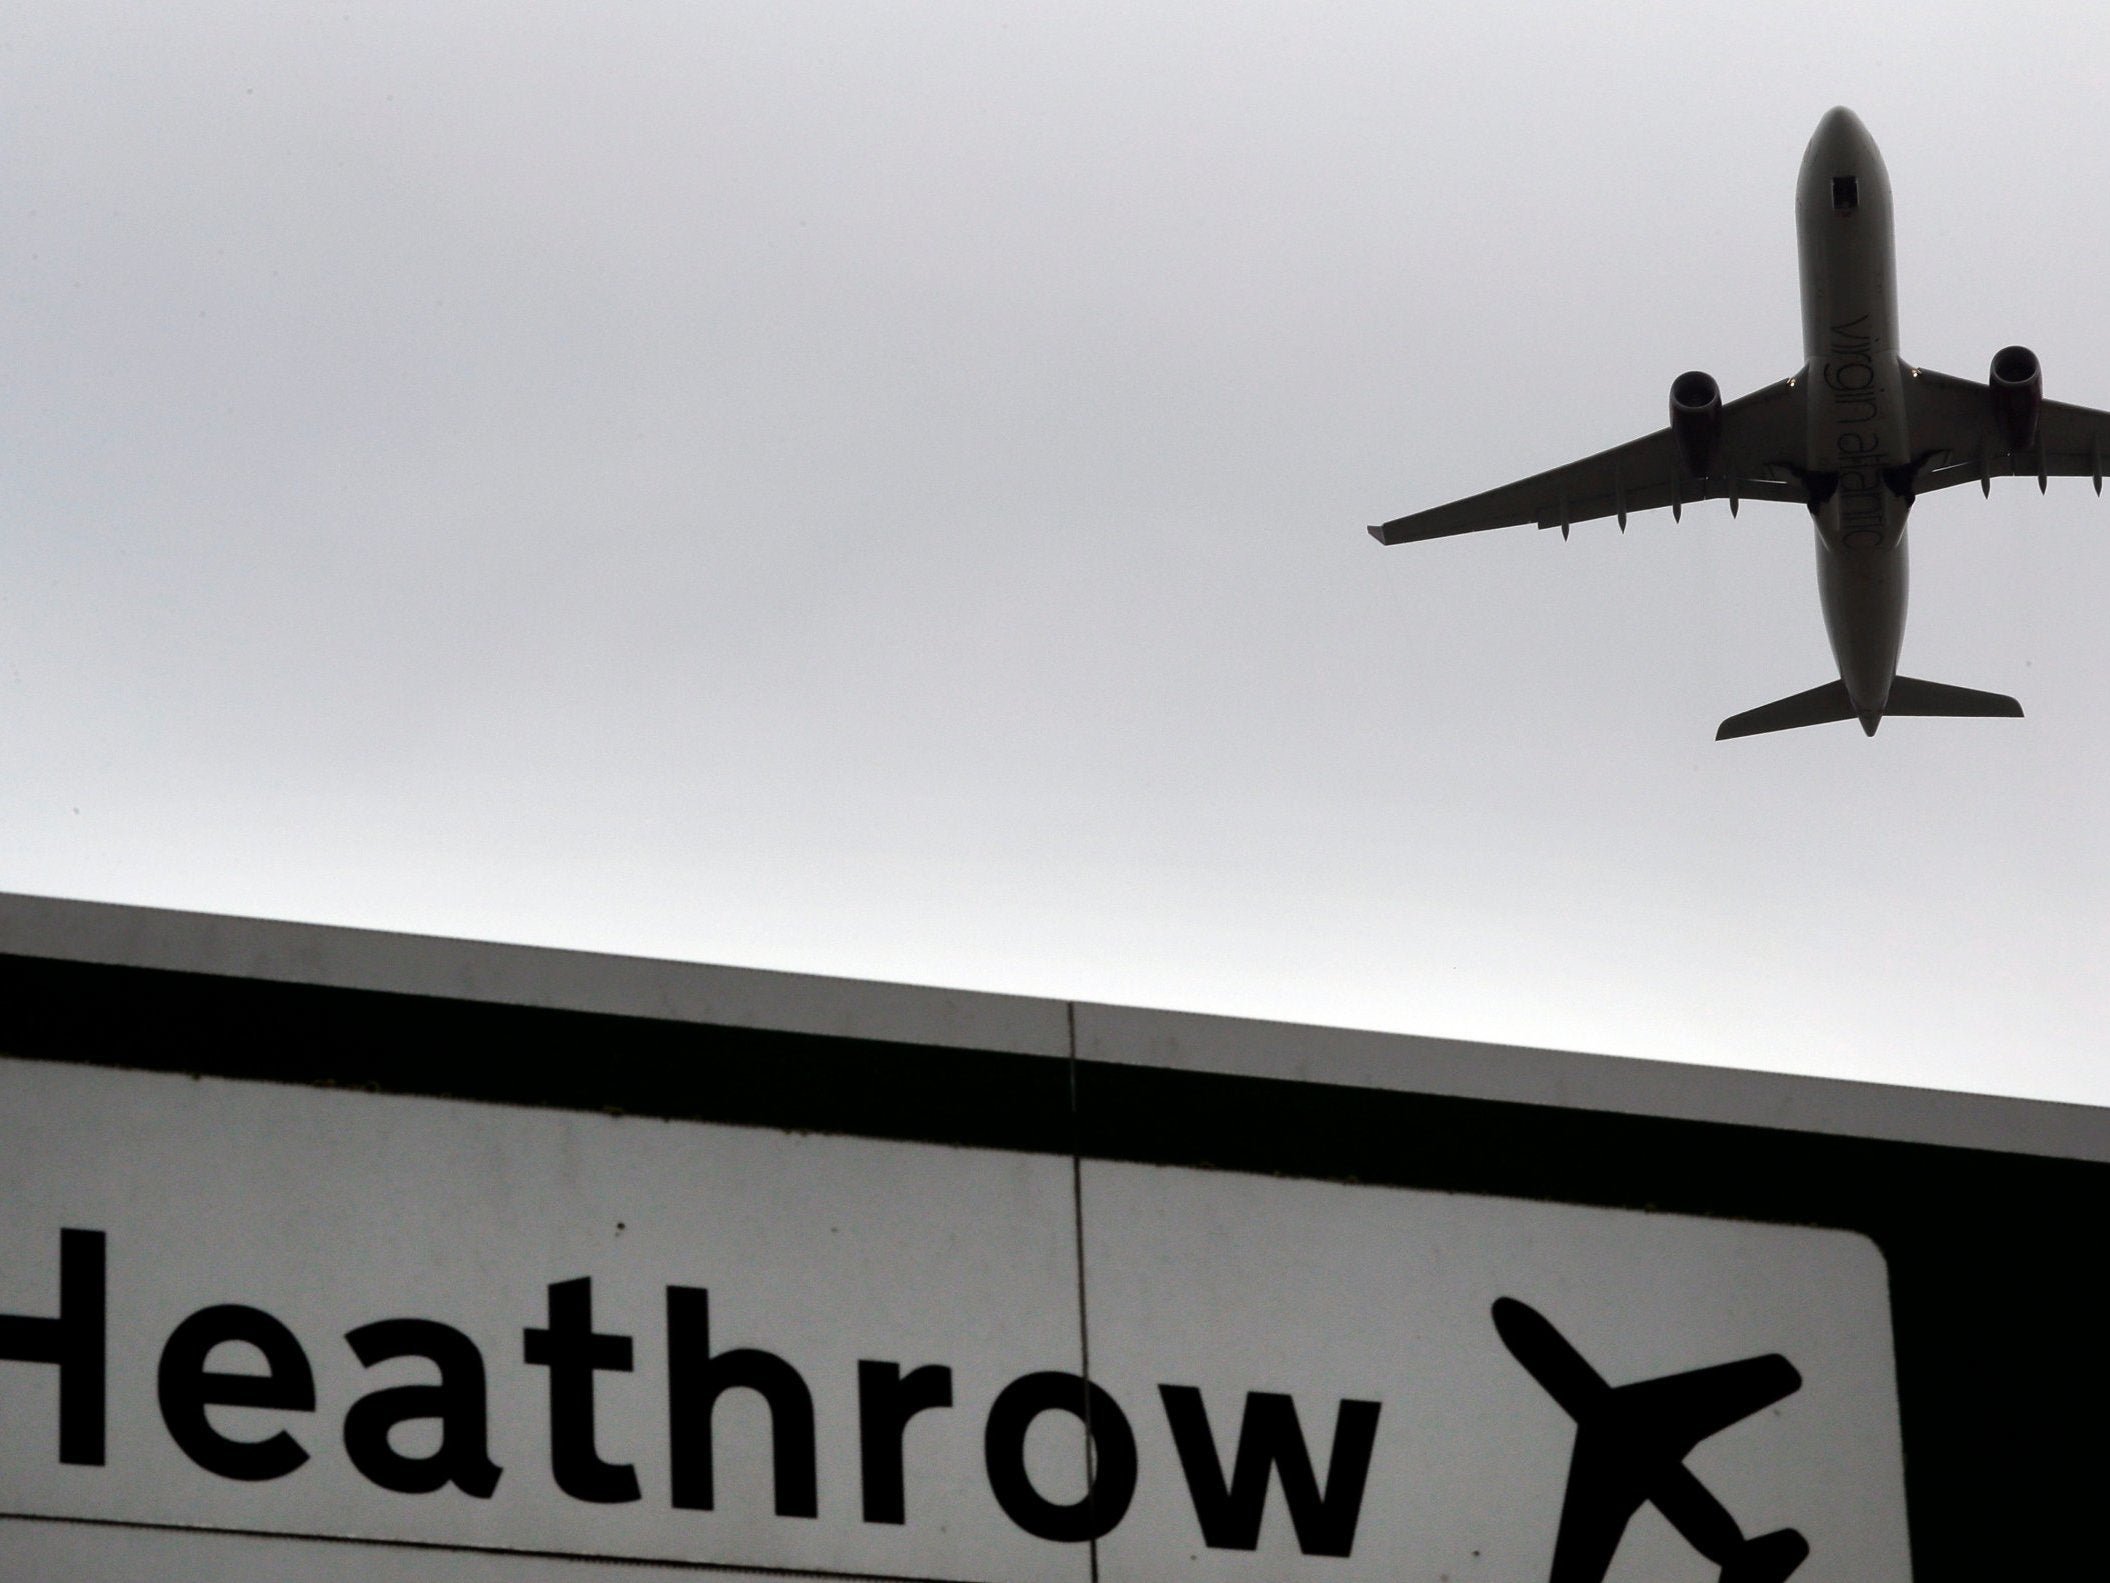 Heathrow drone: George Rusu charged with flying device near airport days after Gatwick chaos The Independent | The Independent